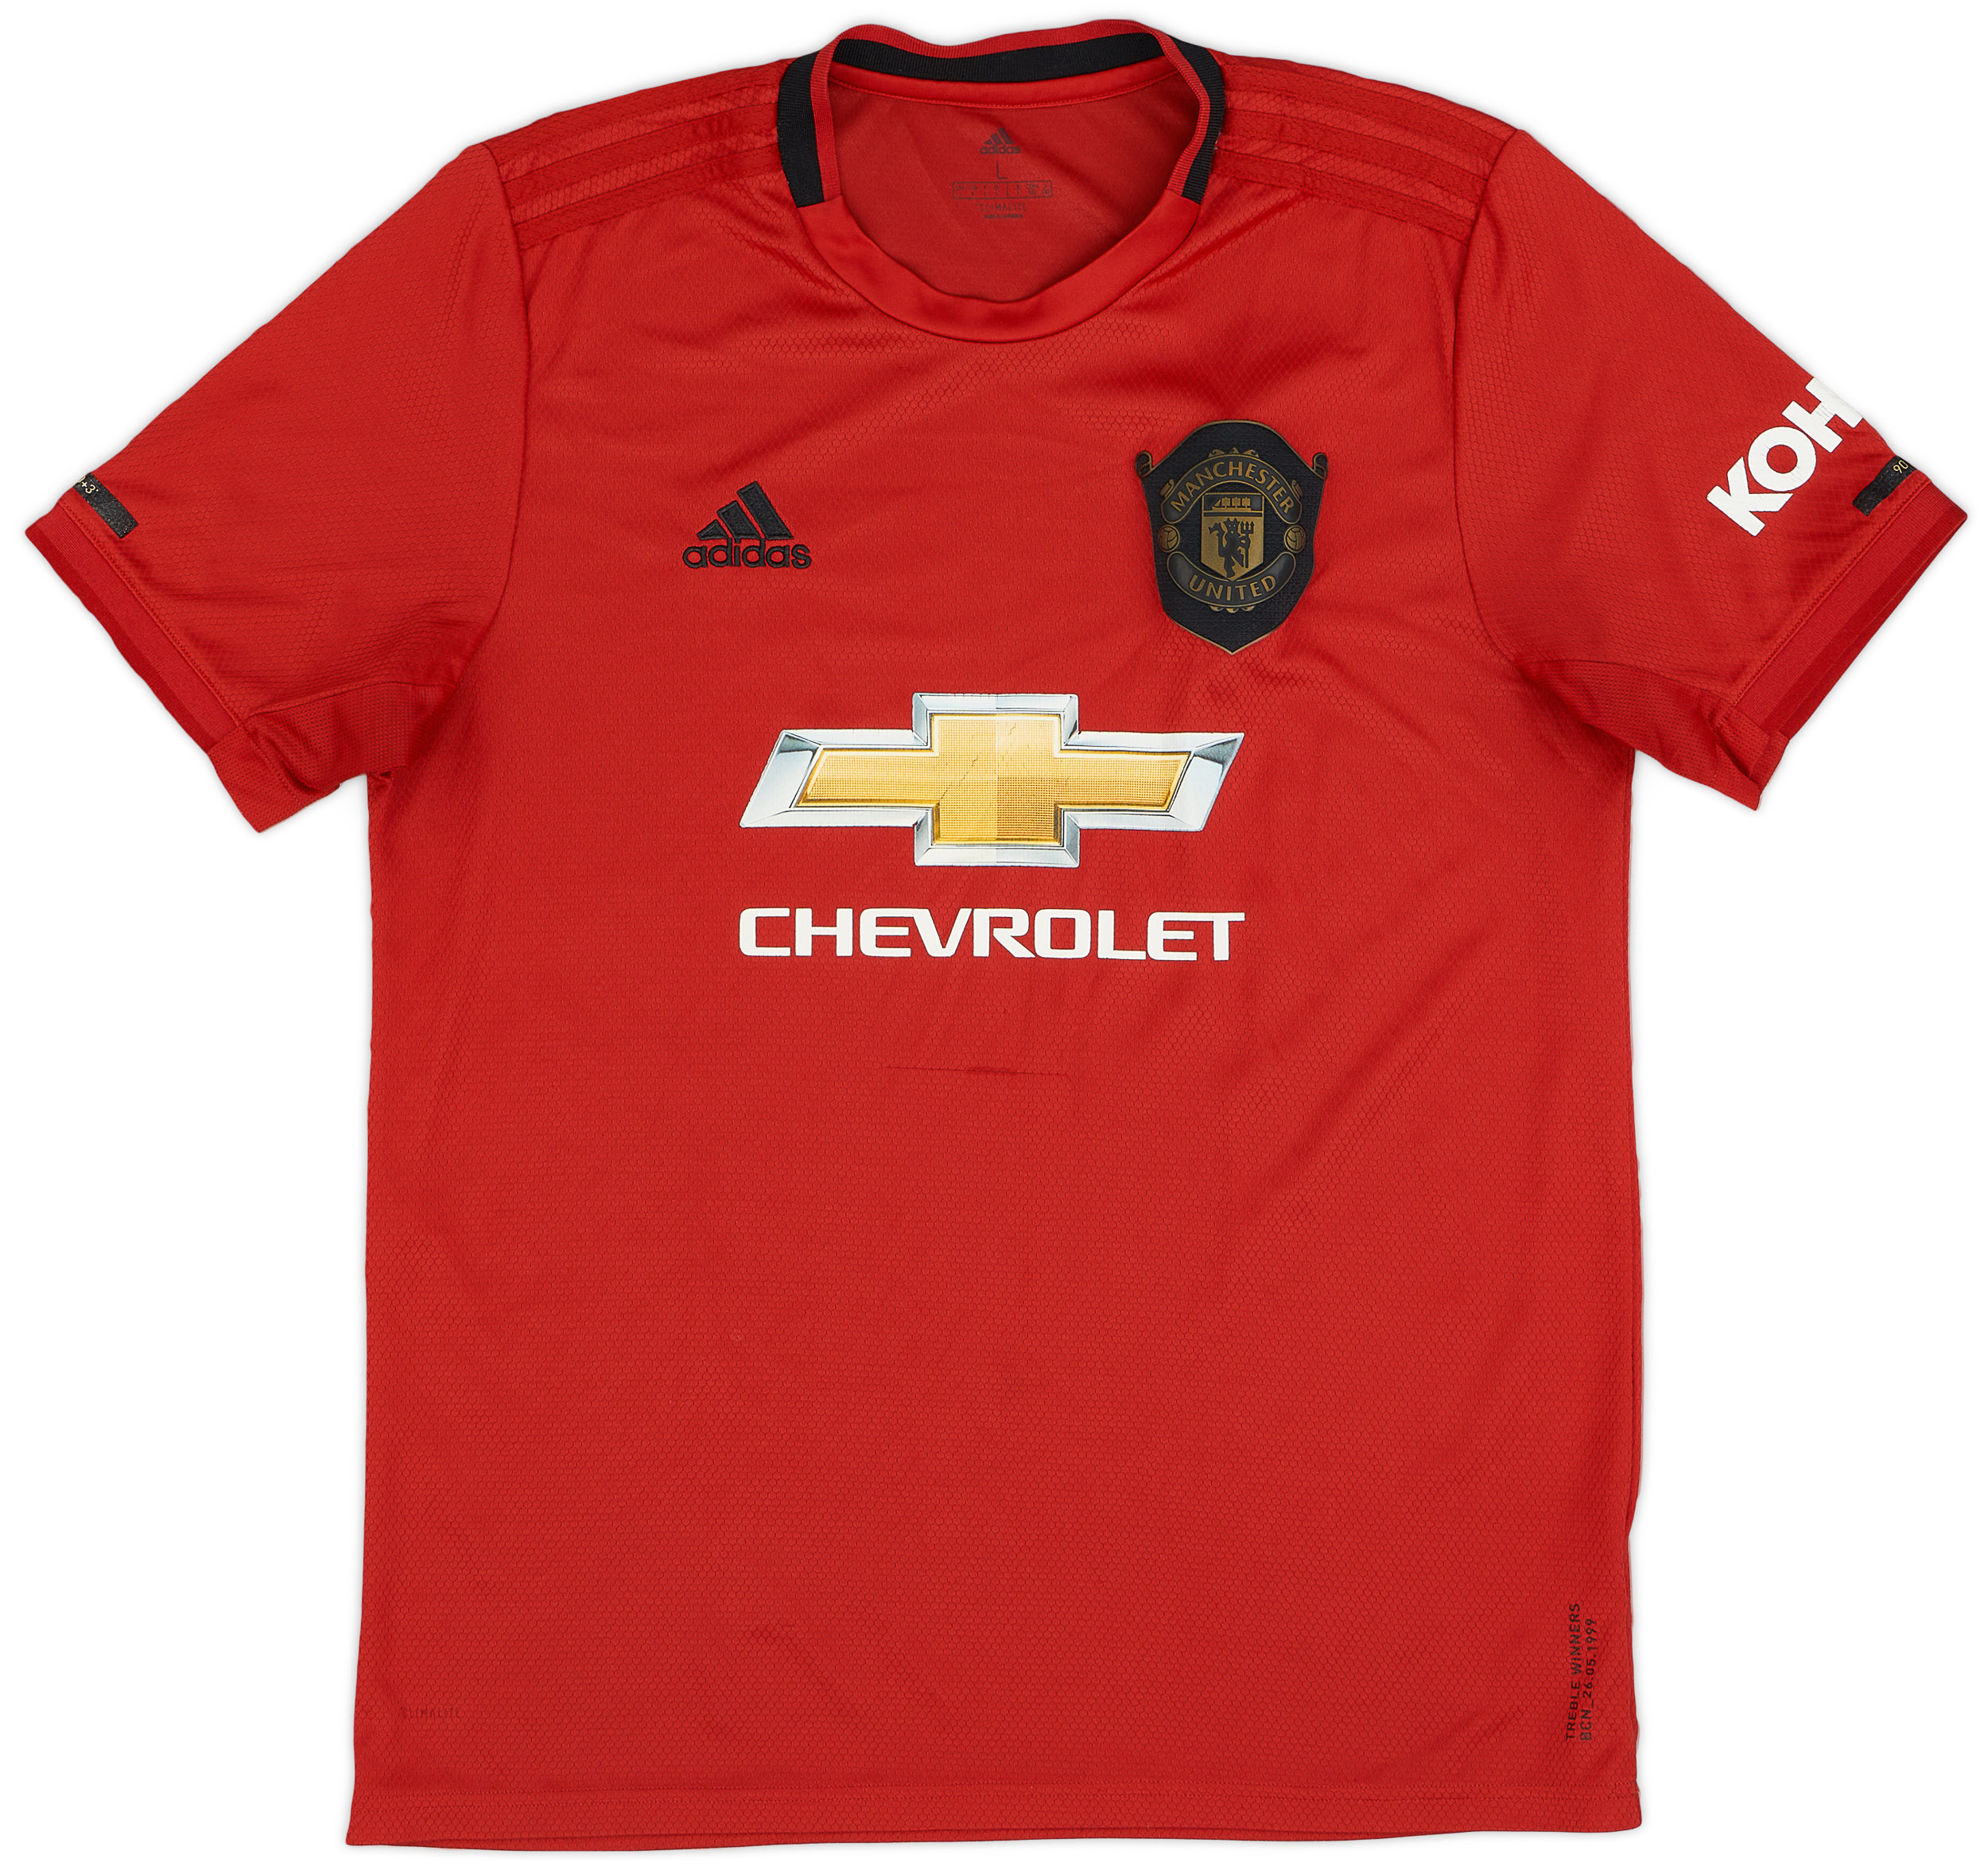 2019-20 Manchester United Home Shirt - 6/10 - ()